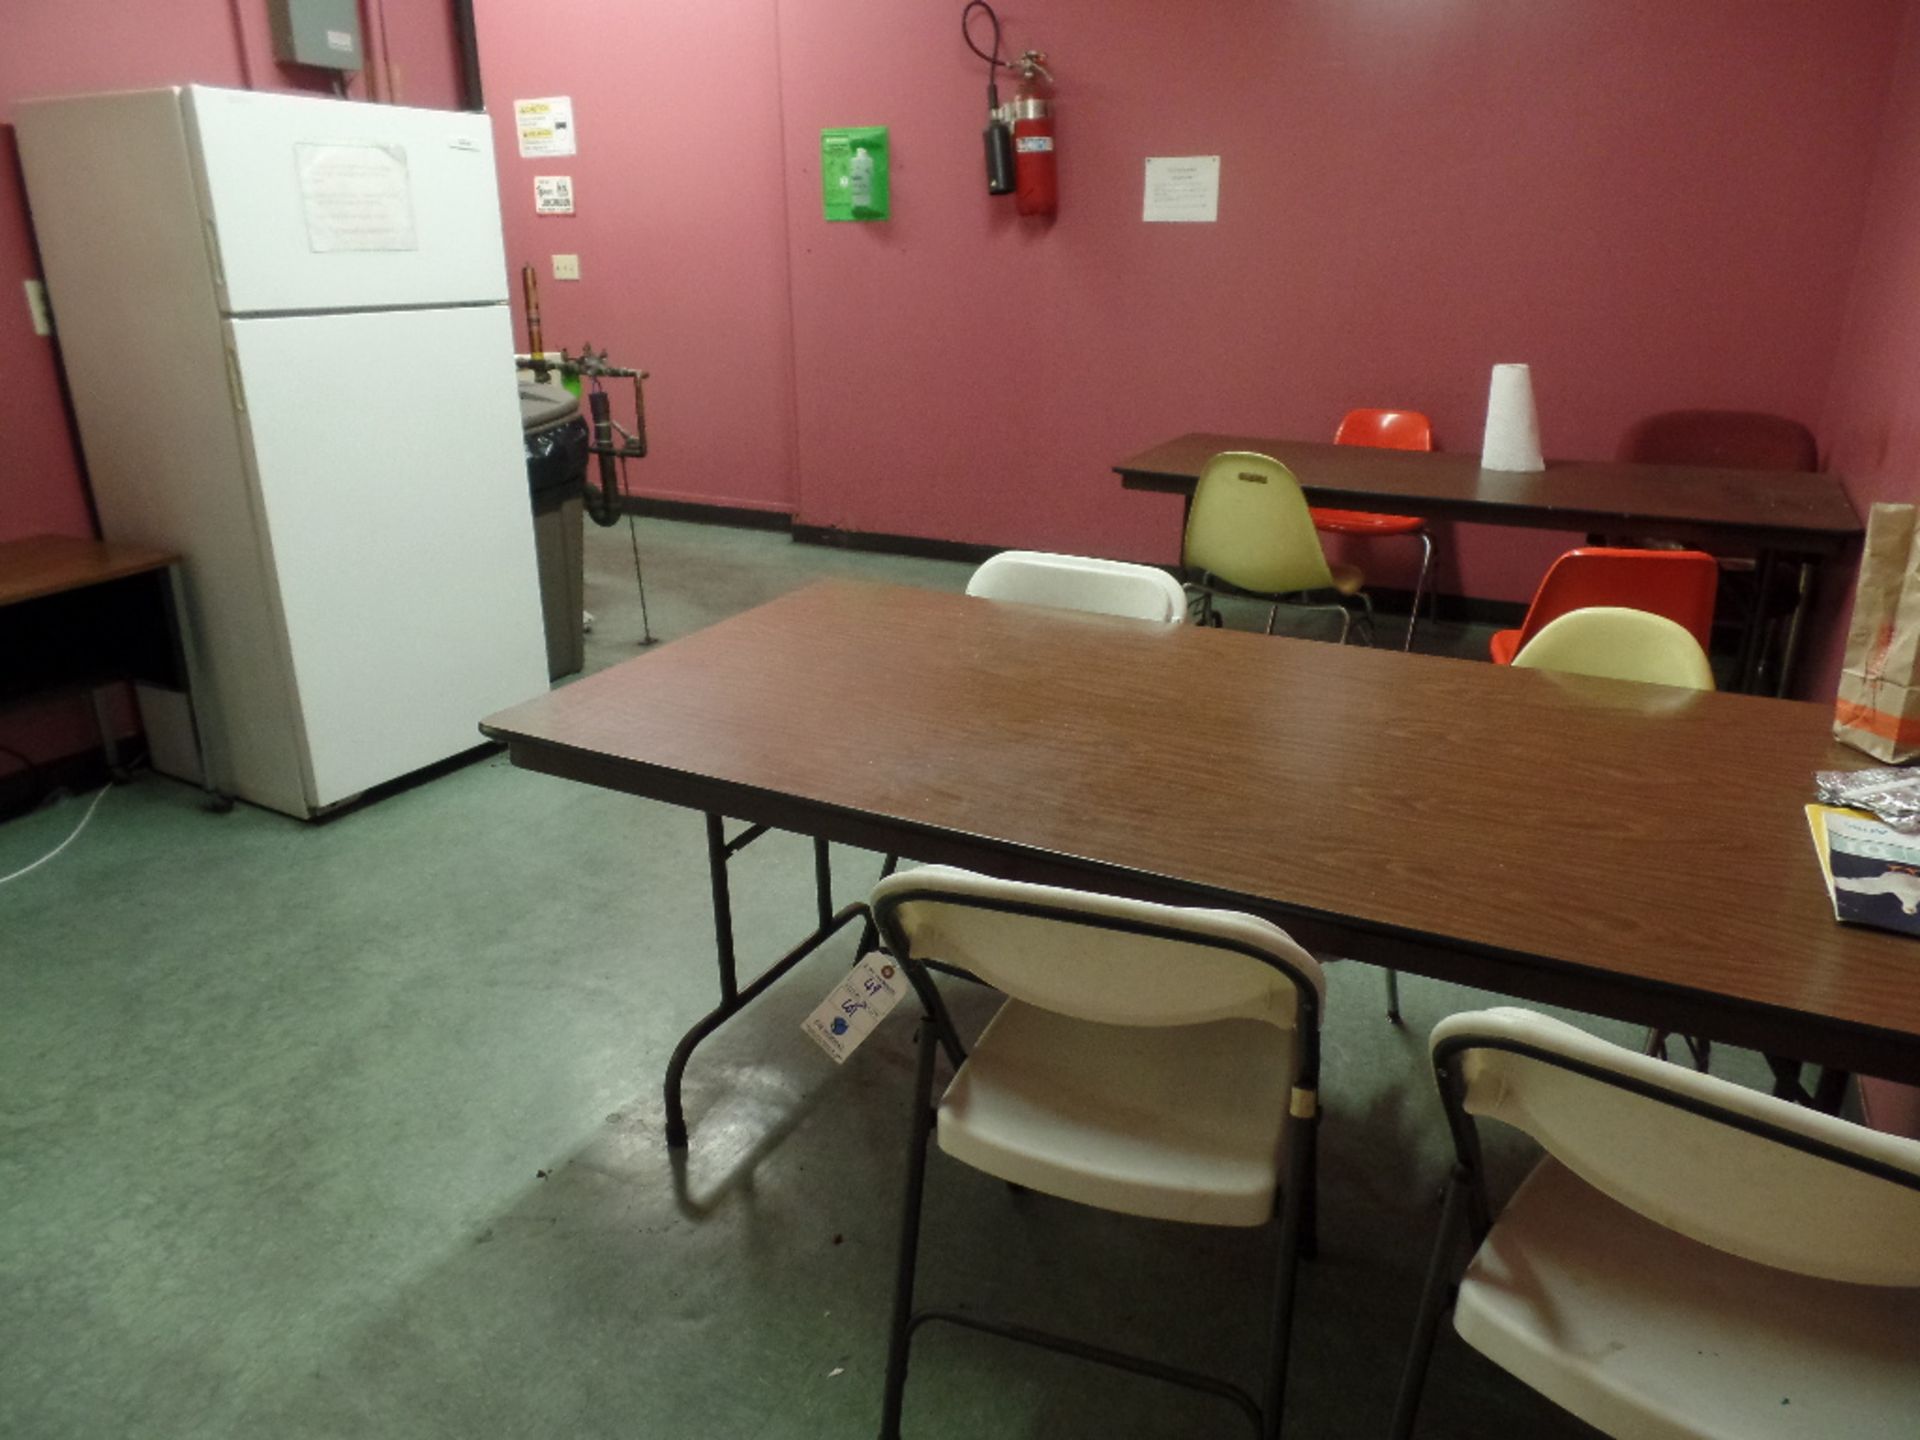 {LOT{ In Kitchen c/o Tables, Chairs, Refrig., Microwave, Janitorial Etc. (NO WATER DISPENSER)